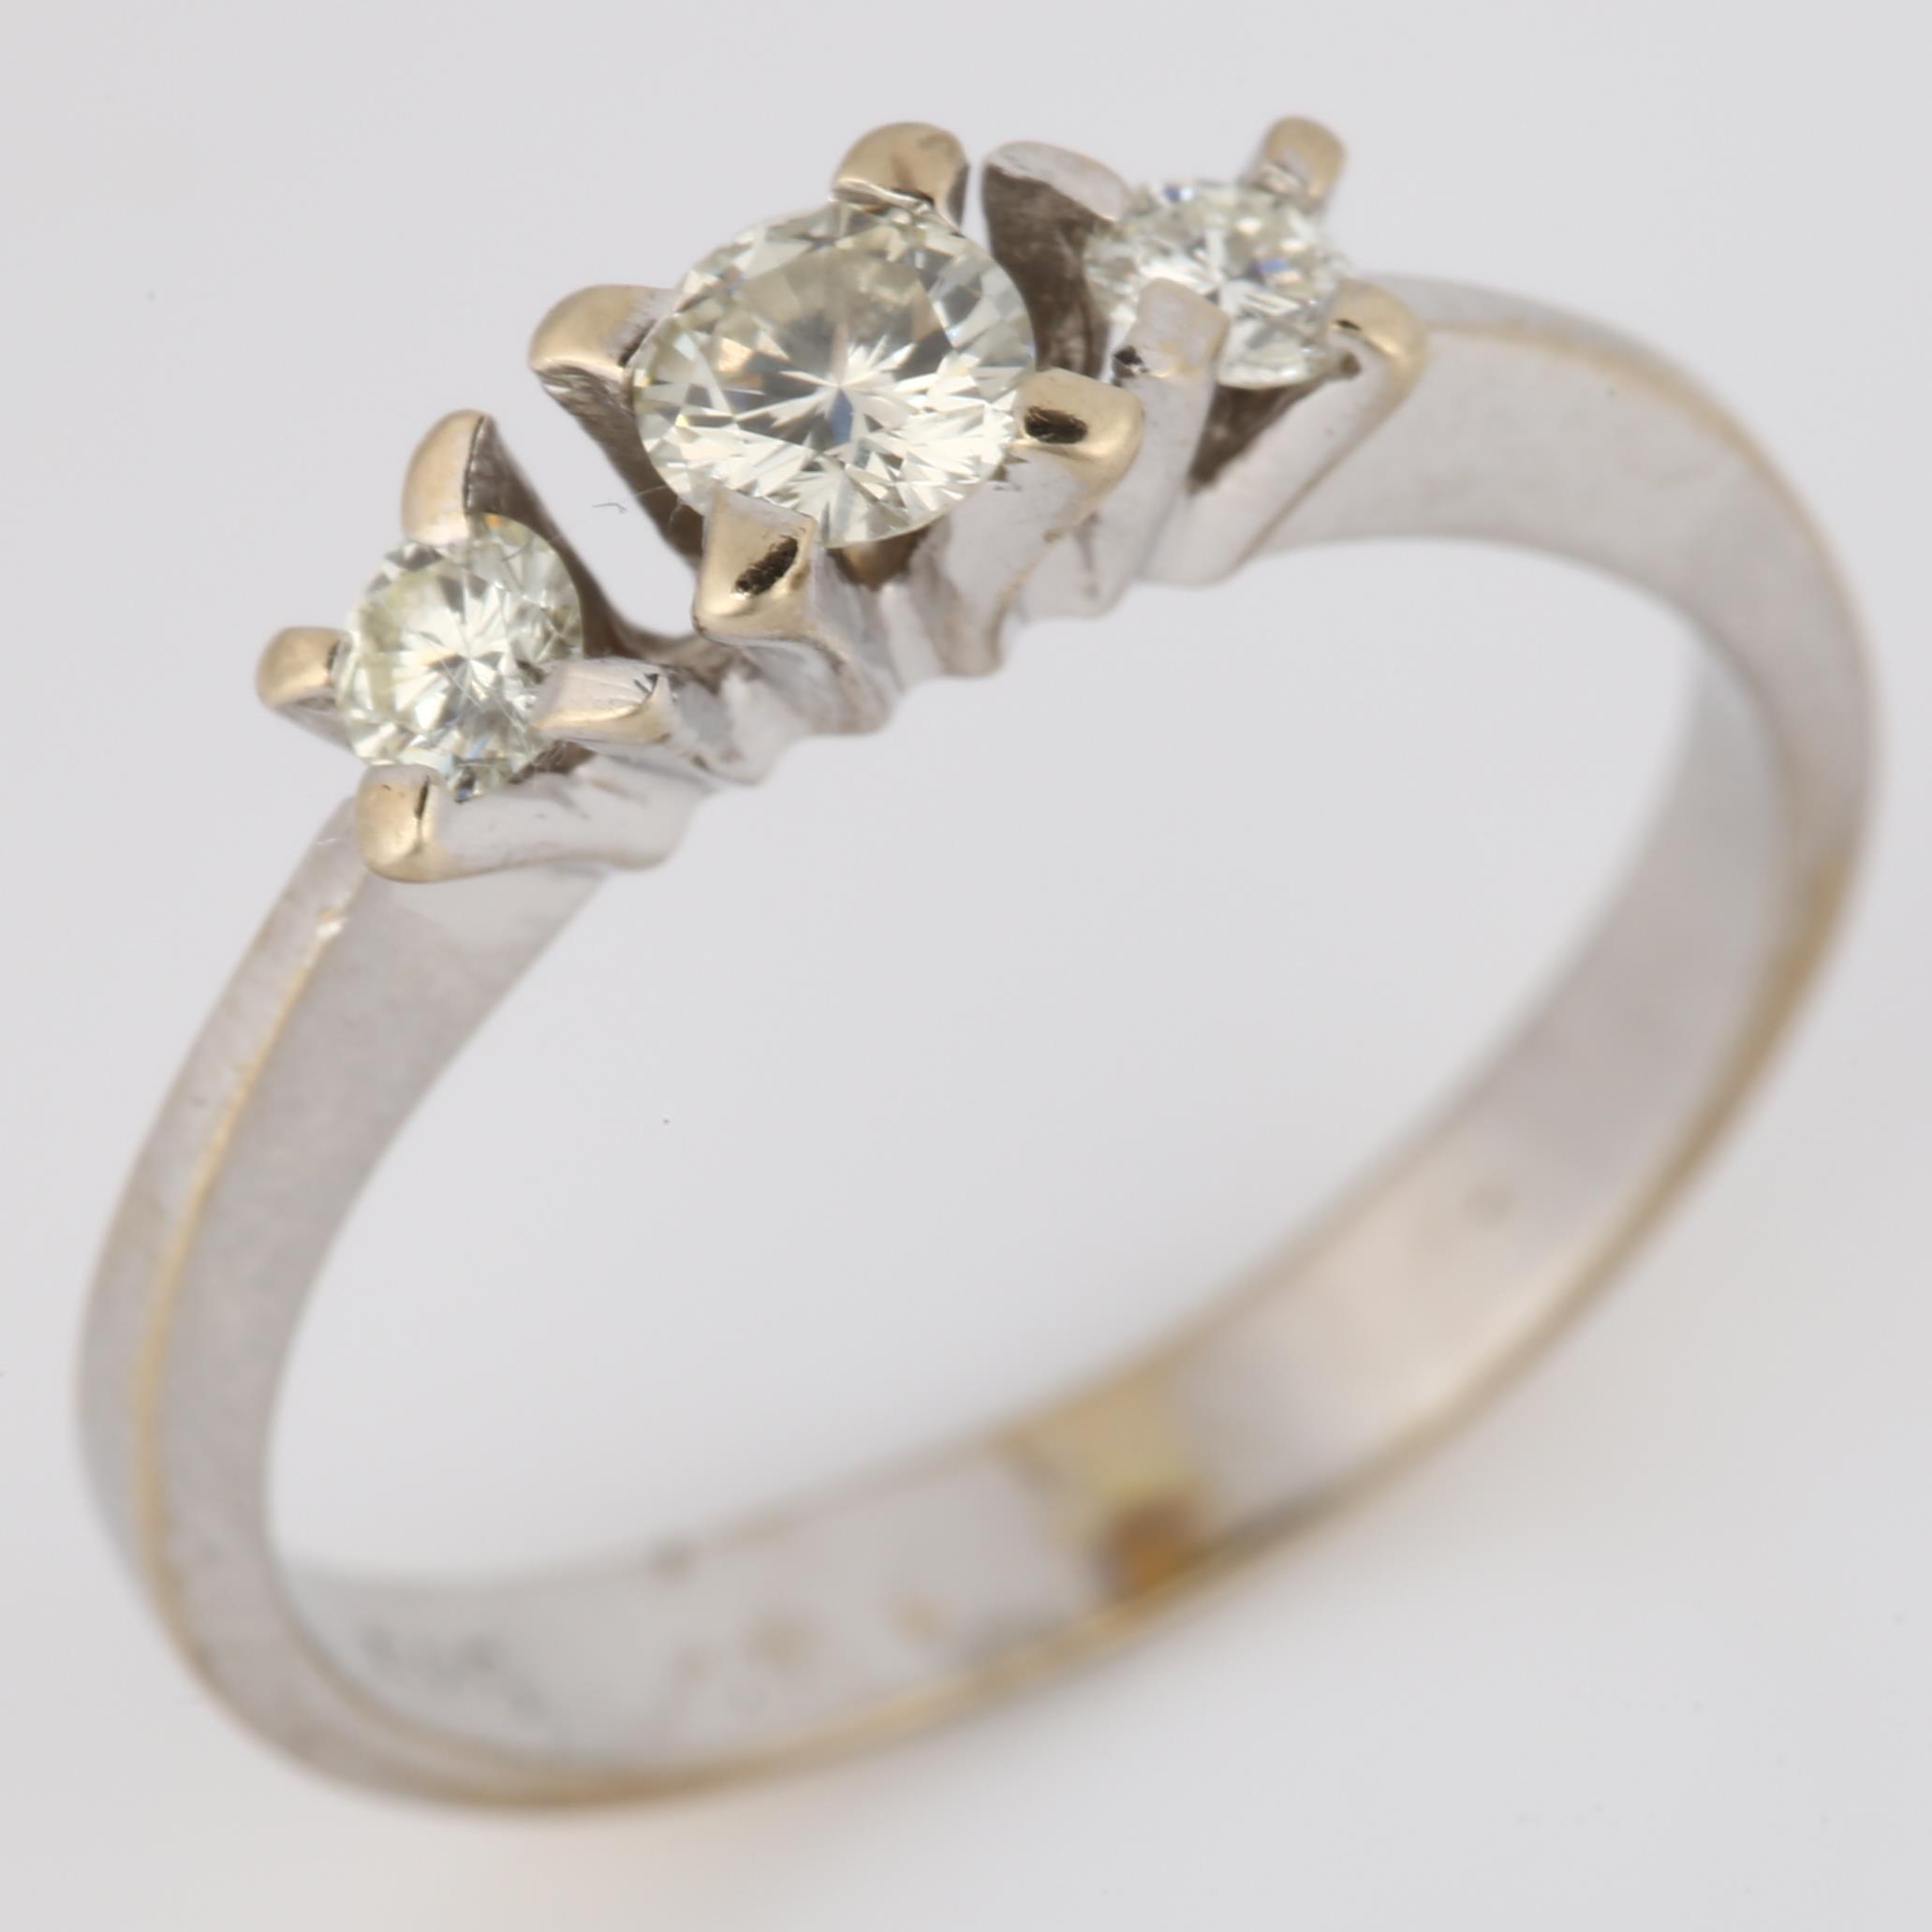 A Continental 14ct white gold three stone diamond ring, set with modern round brilliant-cut - Image 2 of 4